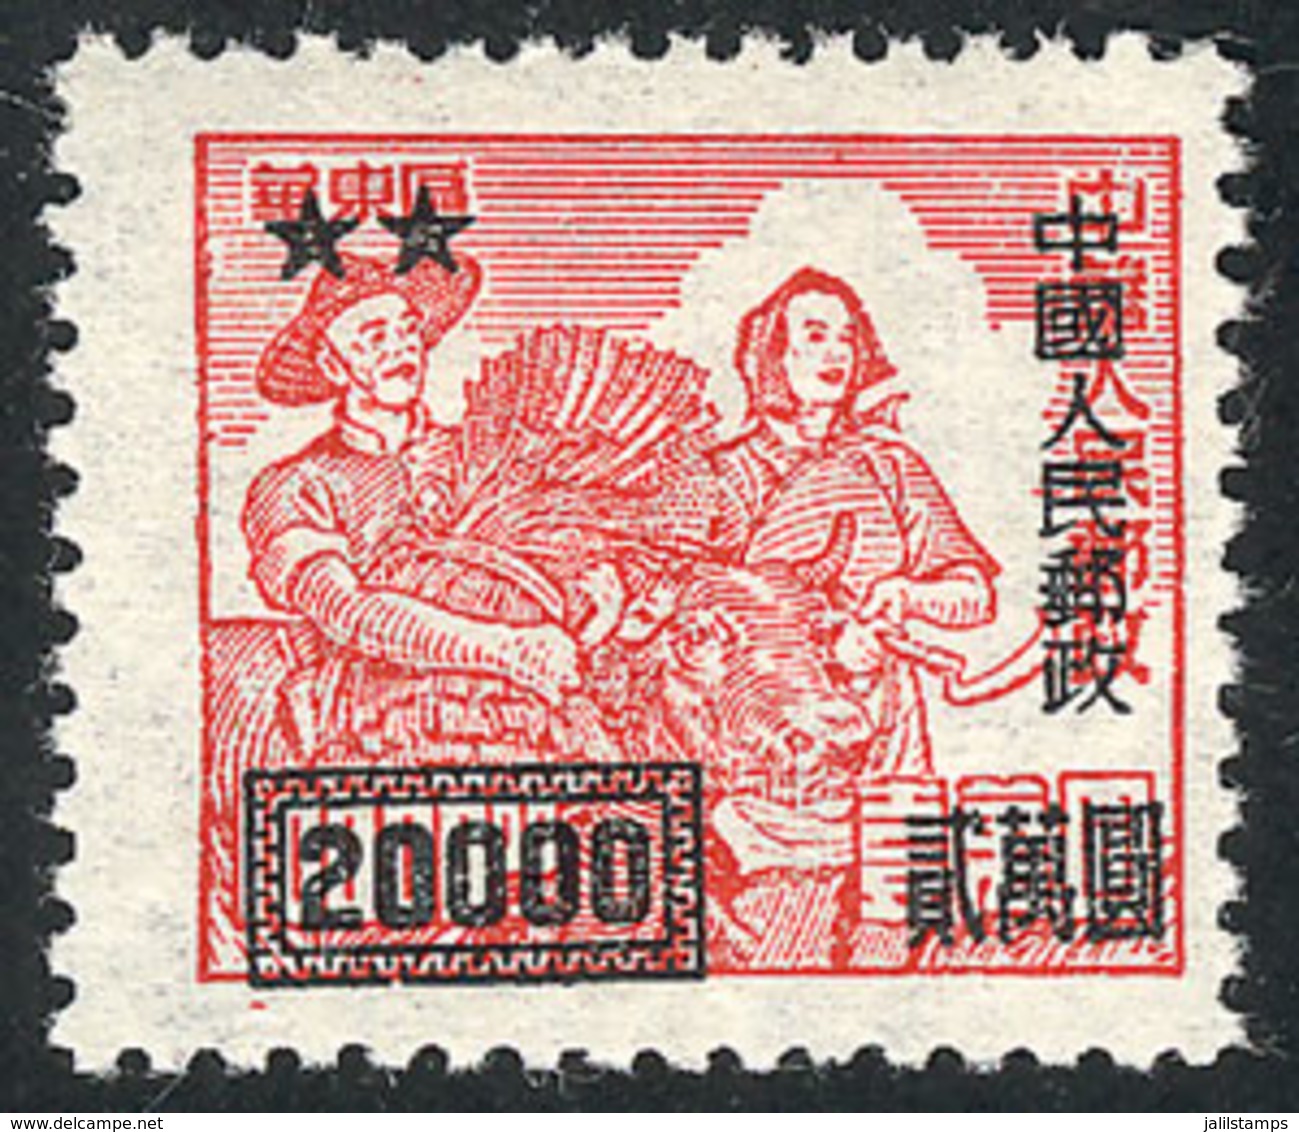 CHINA: Sc.30 (Yvert 896), 1950 Harvesters, Unissued Stamp Of East China With 20000$ Overprint, MNH (issued Without Gum), - Used Stamps